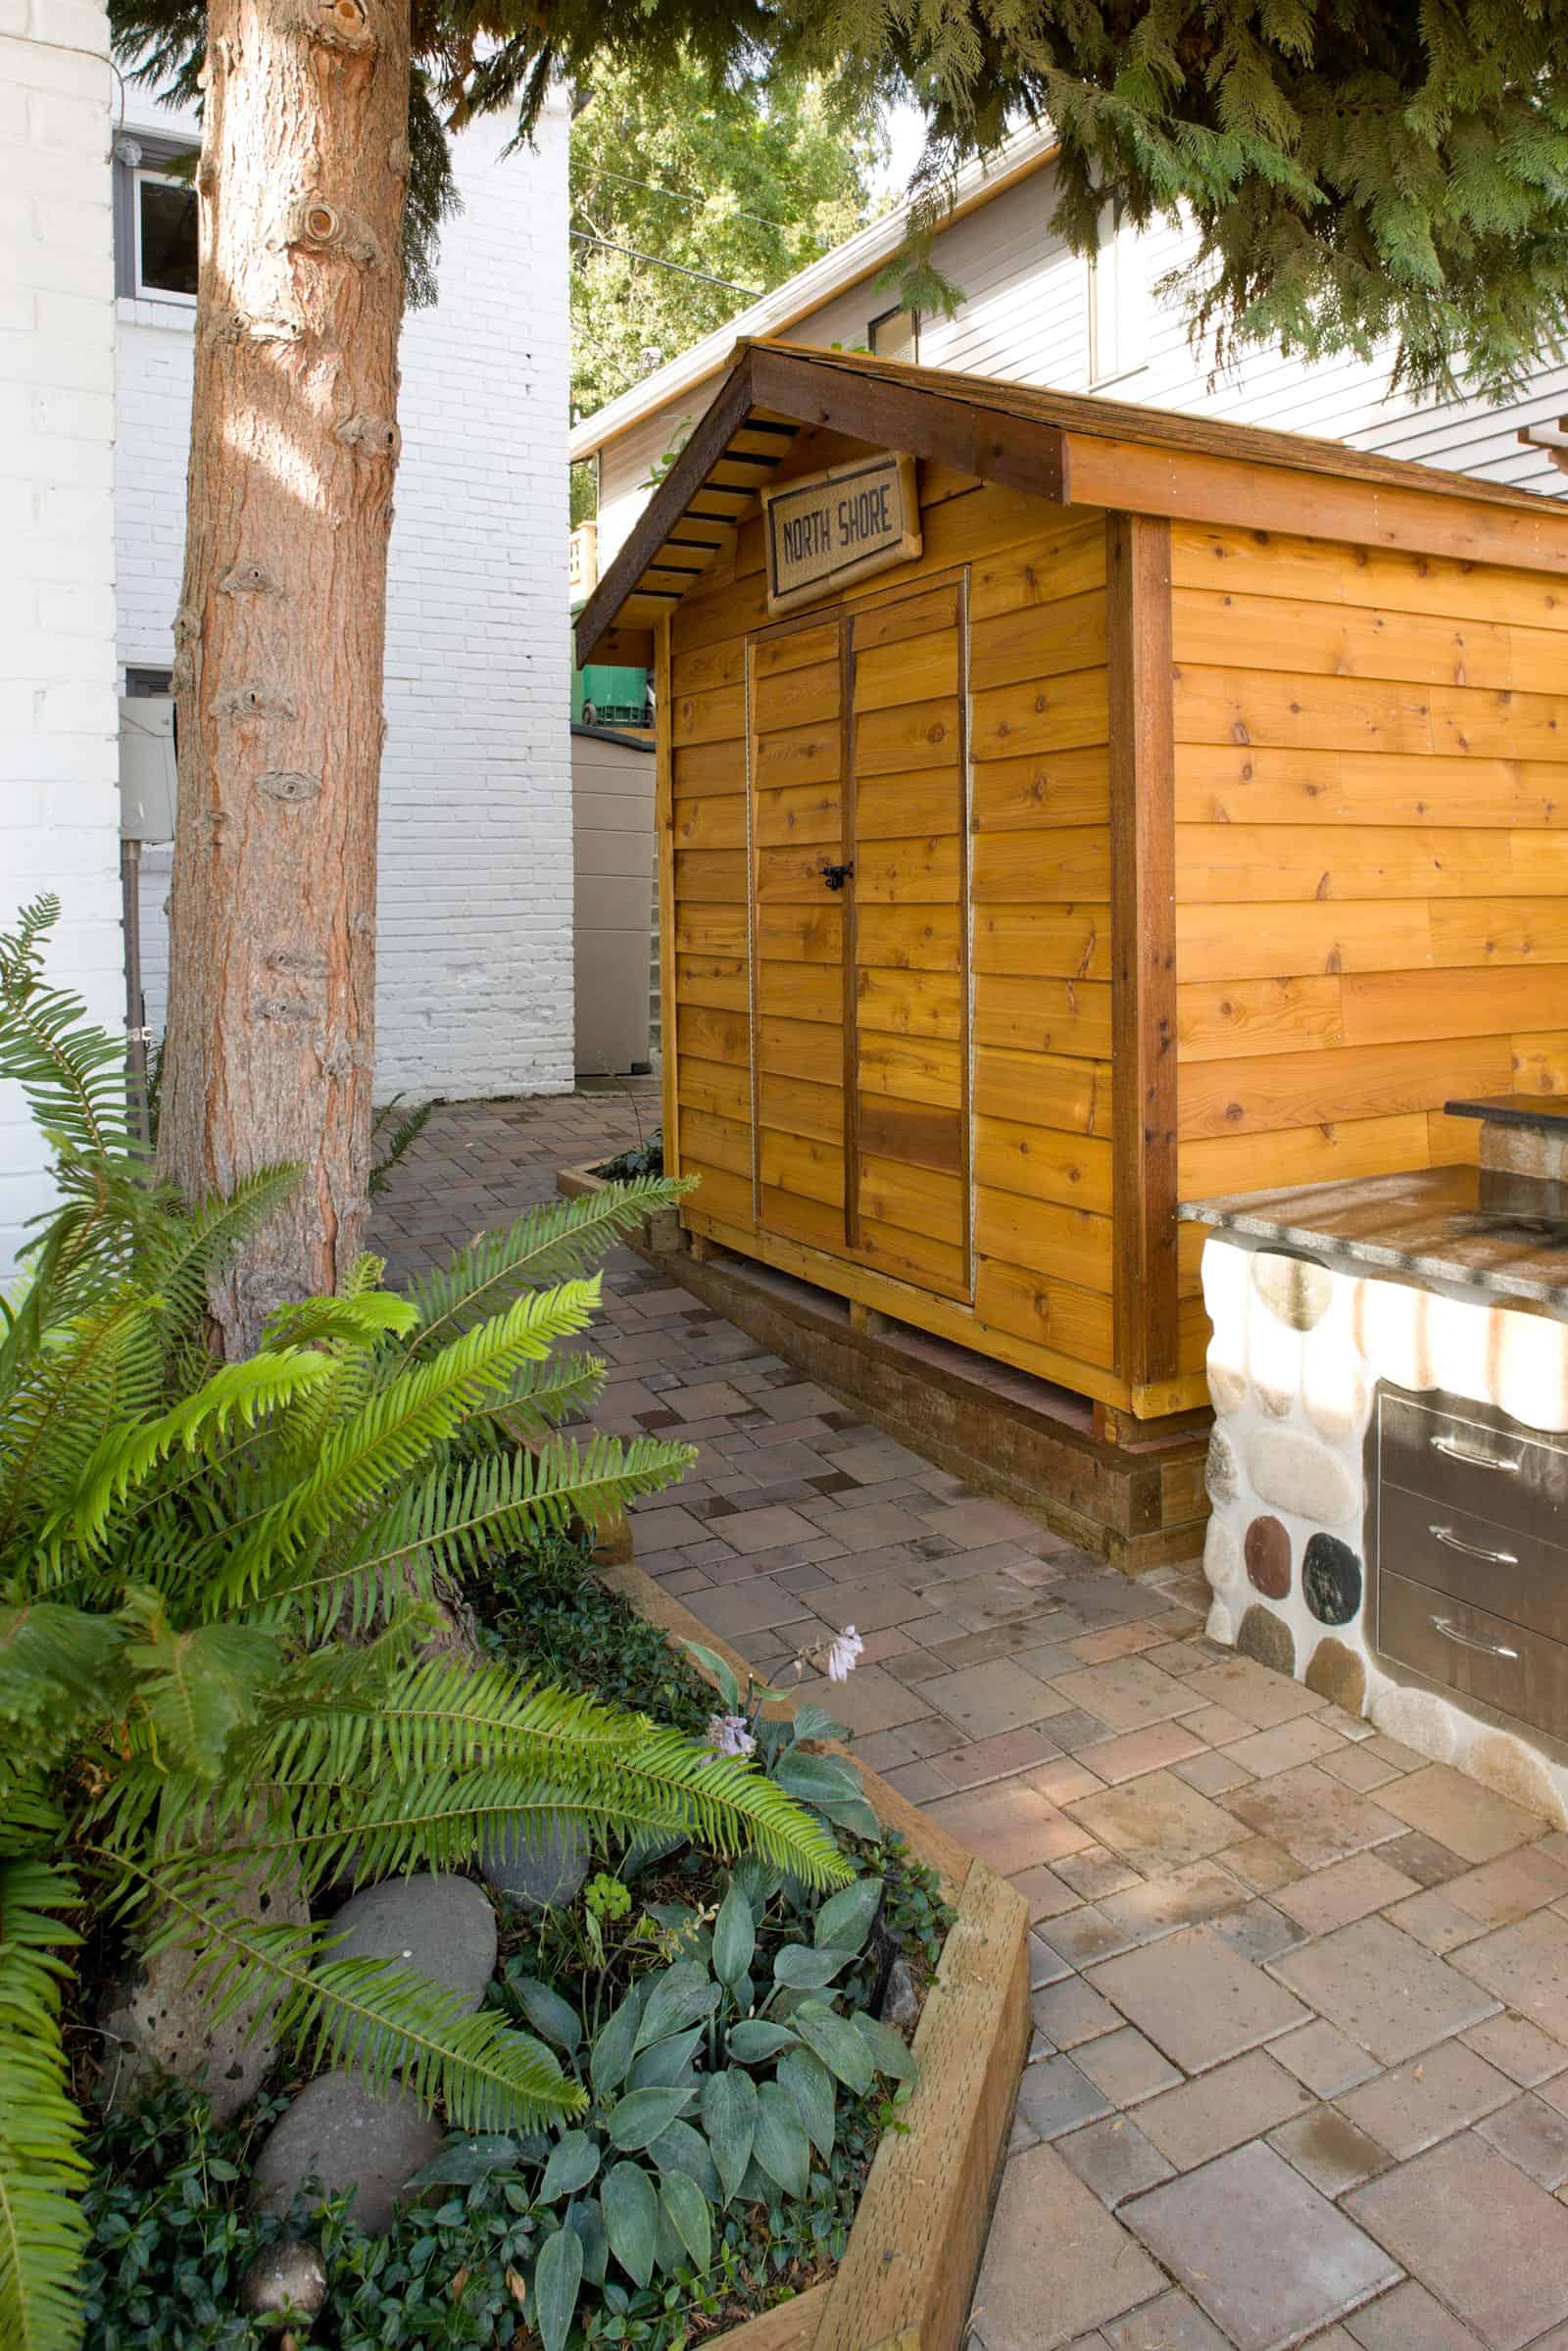 Landscape architecture with brick pathway, custom made wood shed and stone grill